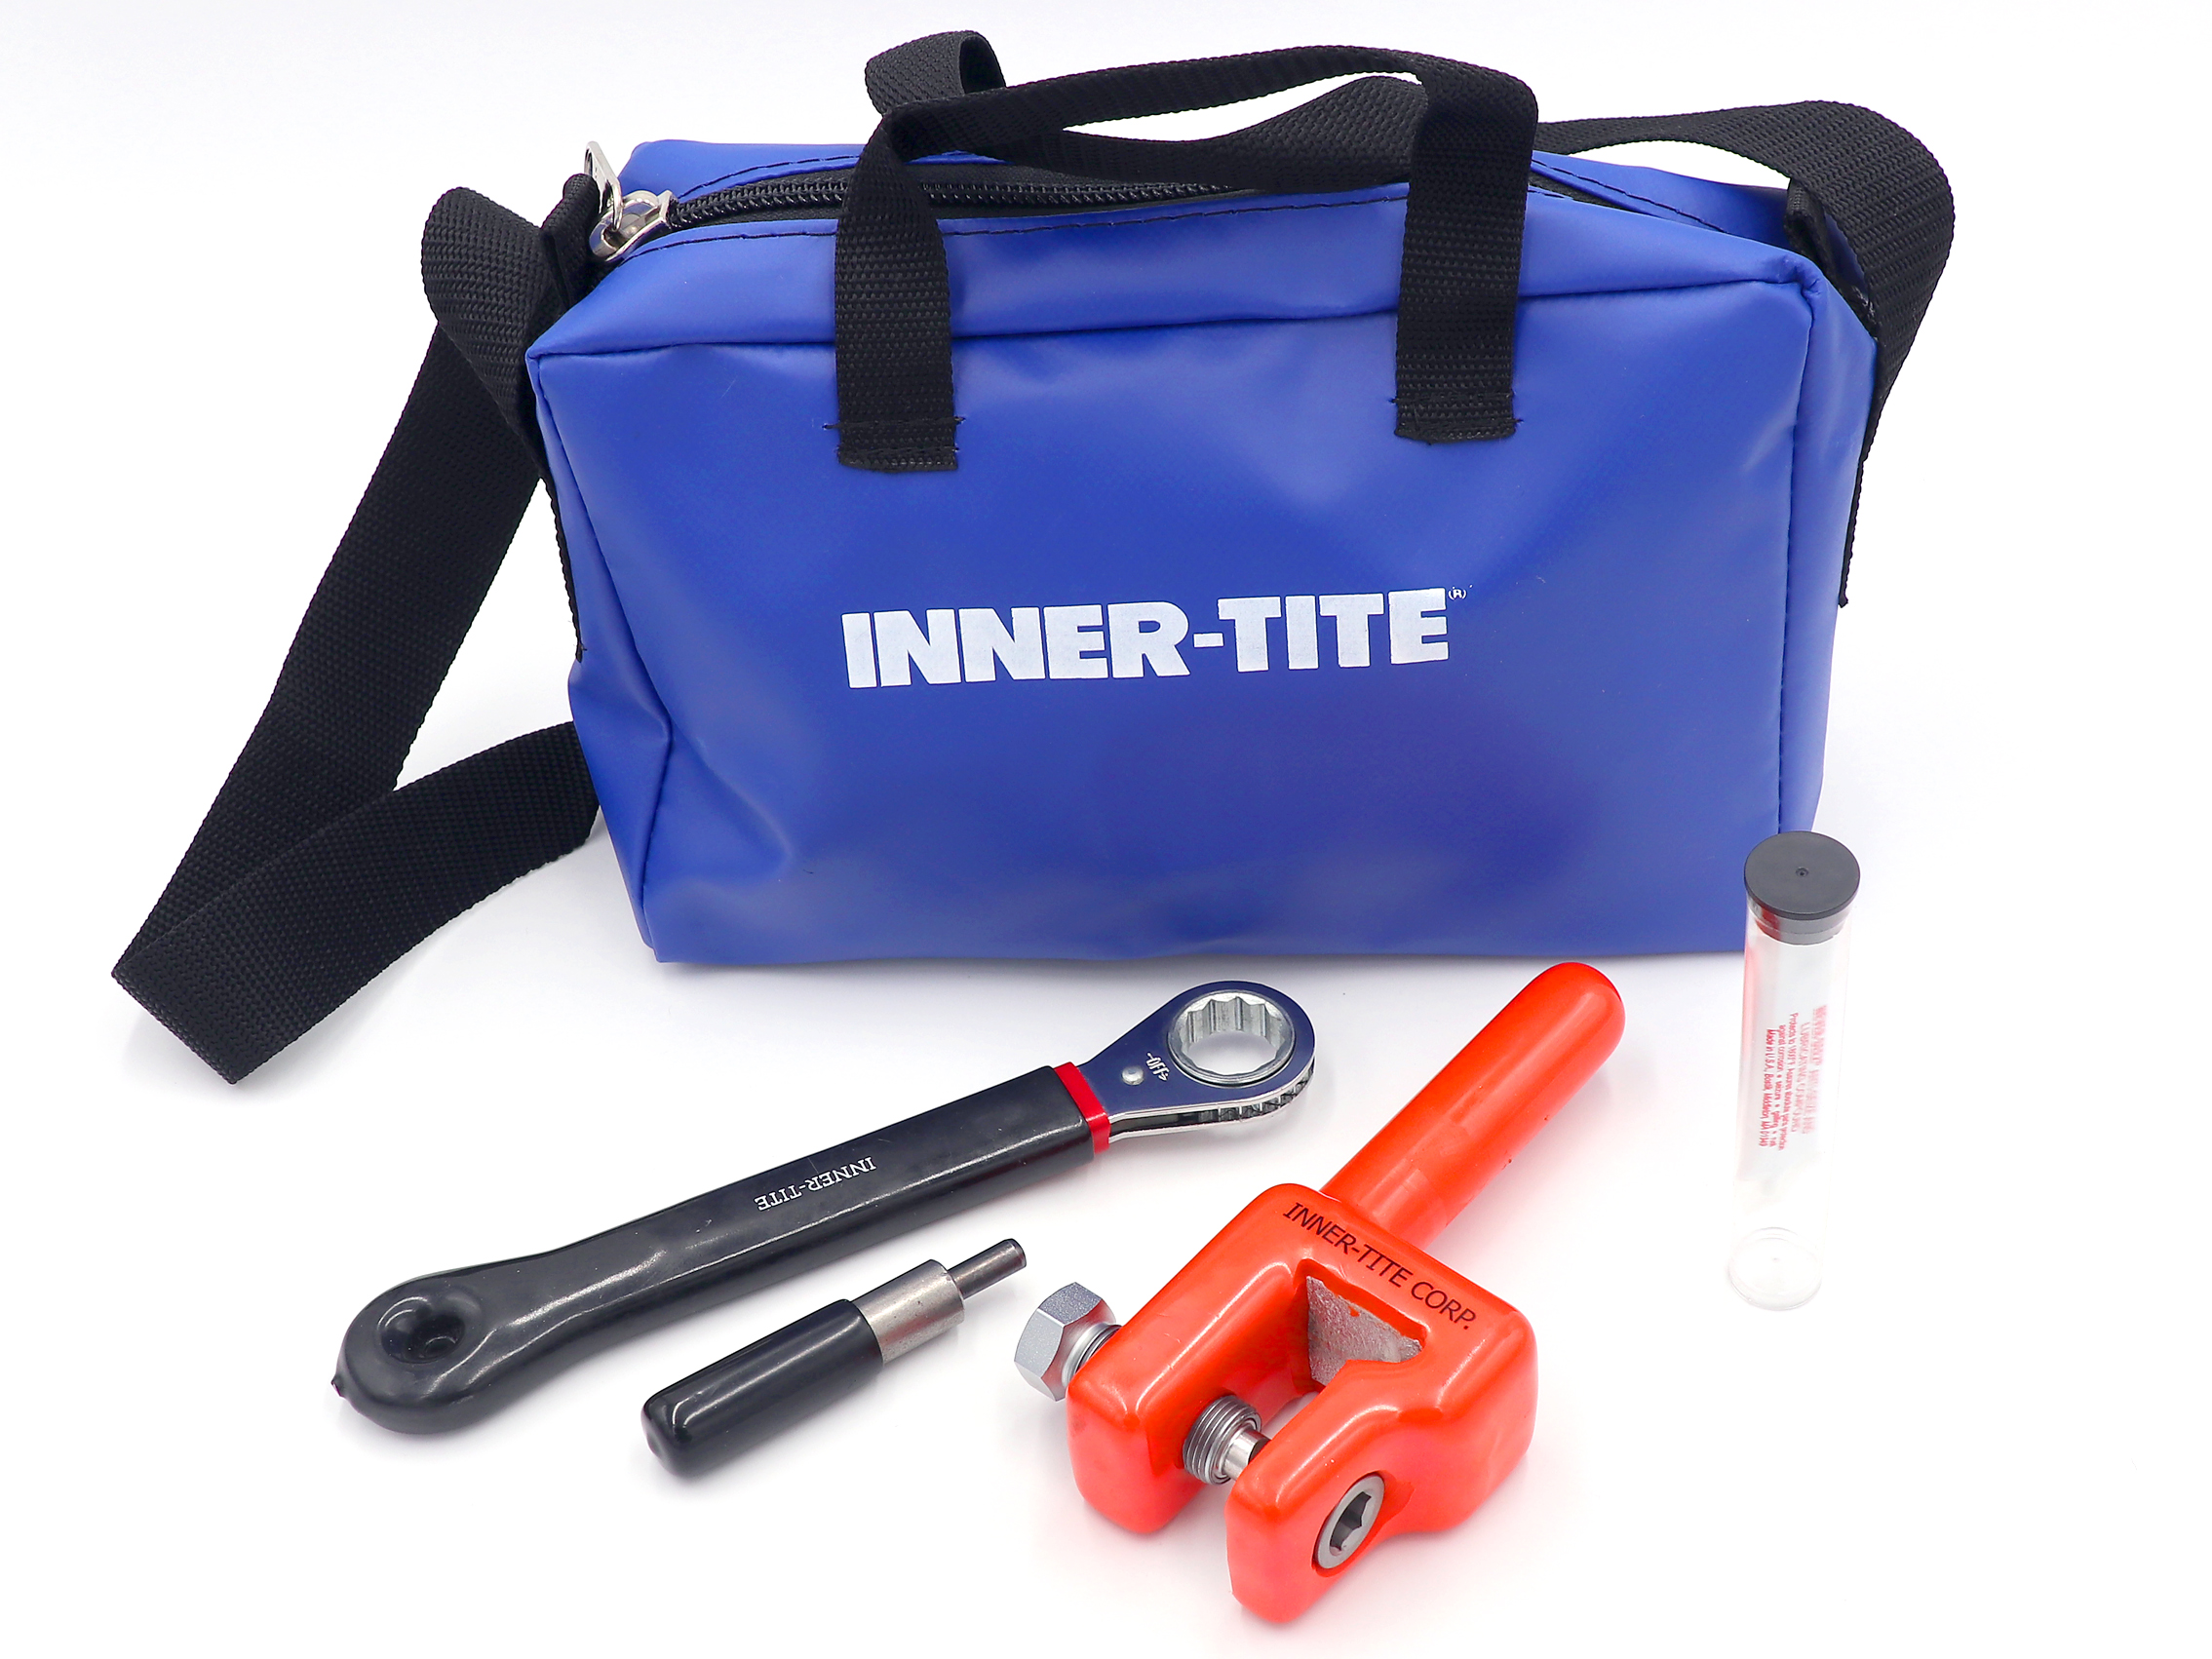 The Punch Tool is available in a kit that features a carry bag, ratchet wrench and knock-out tool.